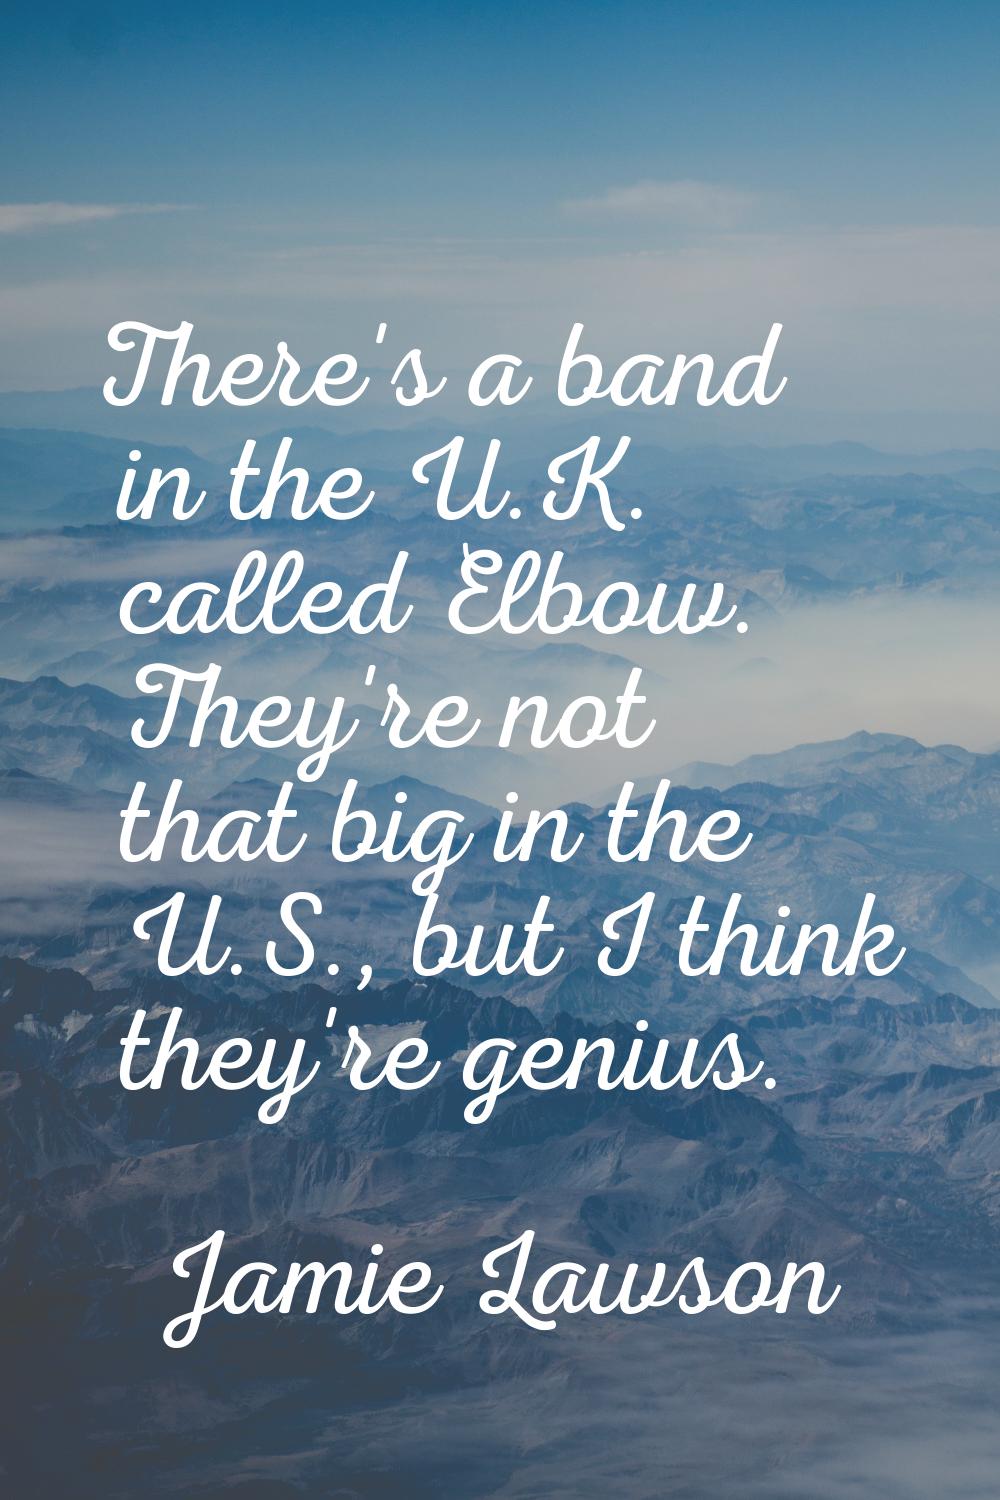 There's a band in the U.K. called Elbow. They're not that big in the U.S., but I think they're geni